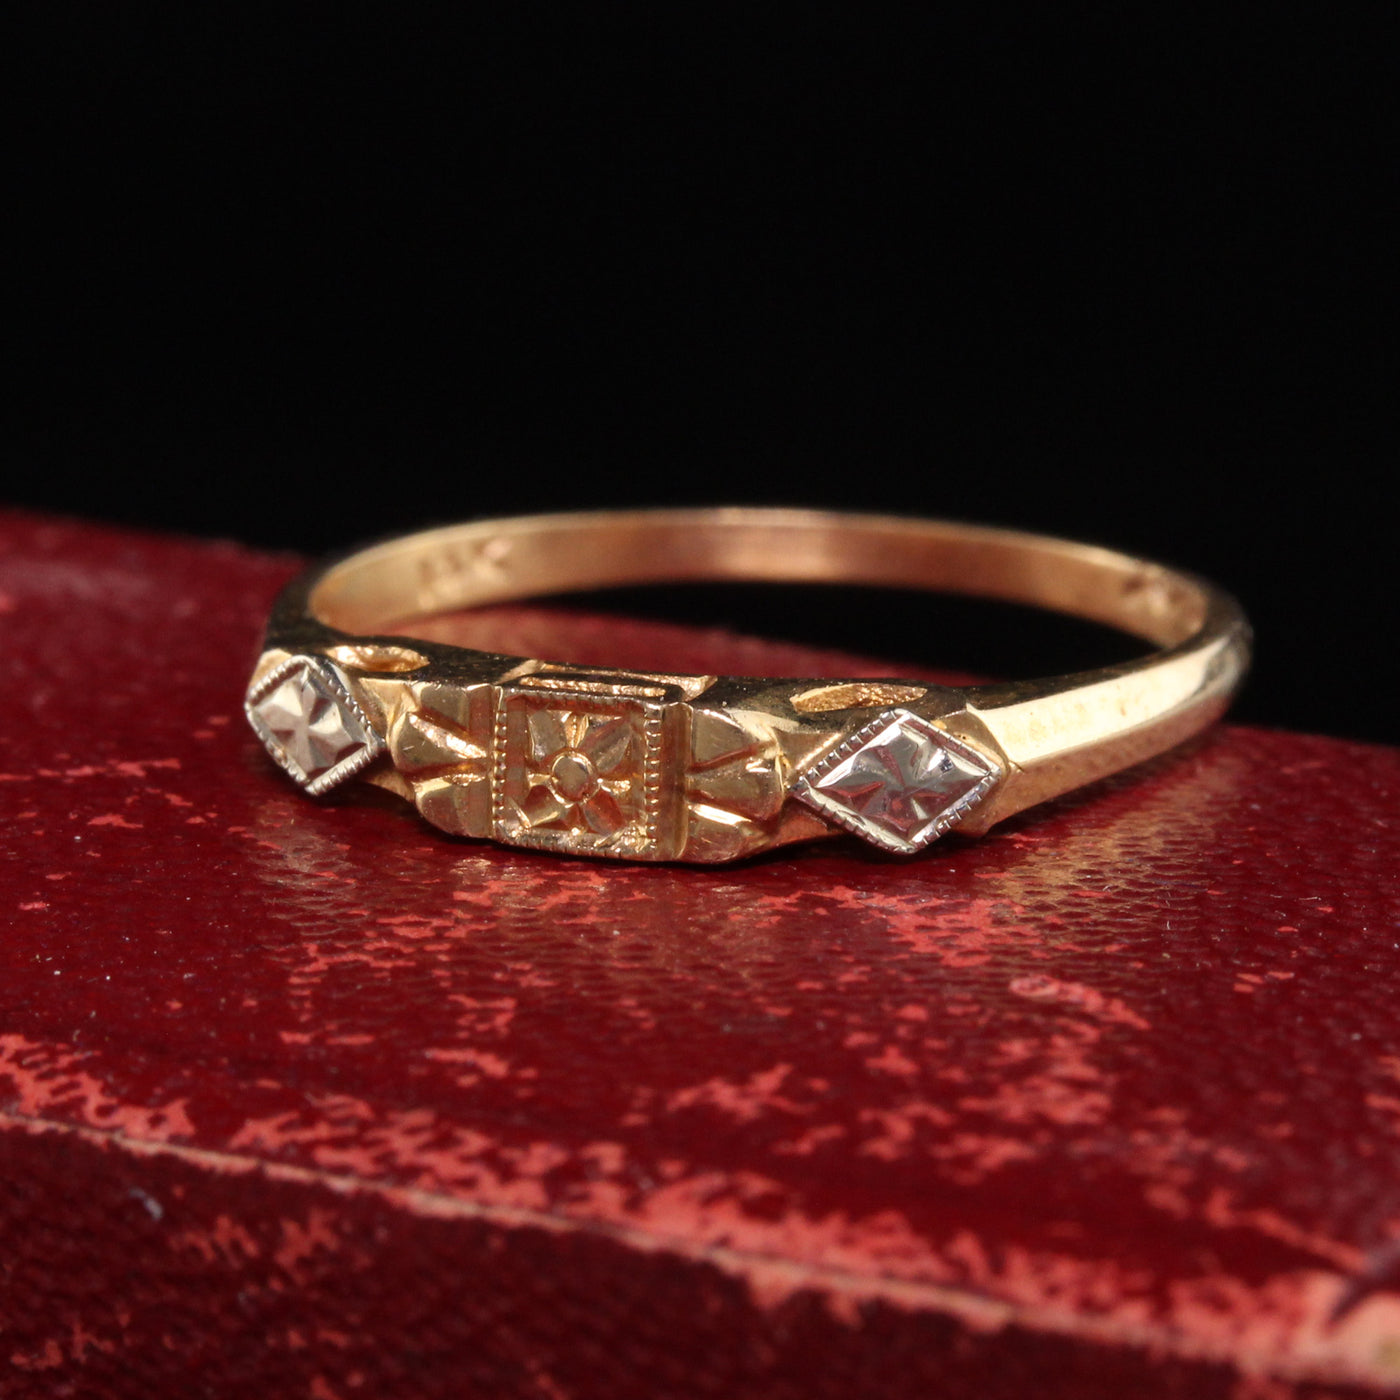 Antique Art Deco 14K Yellow Gold Two Tone Wedding Band - Size 6 1/4